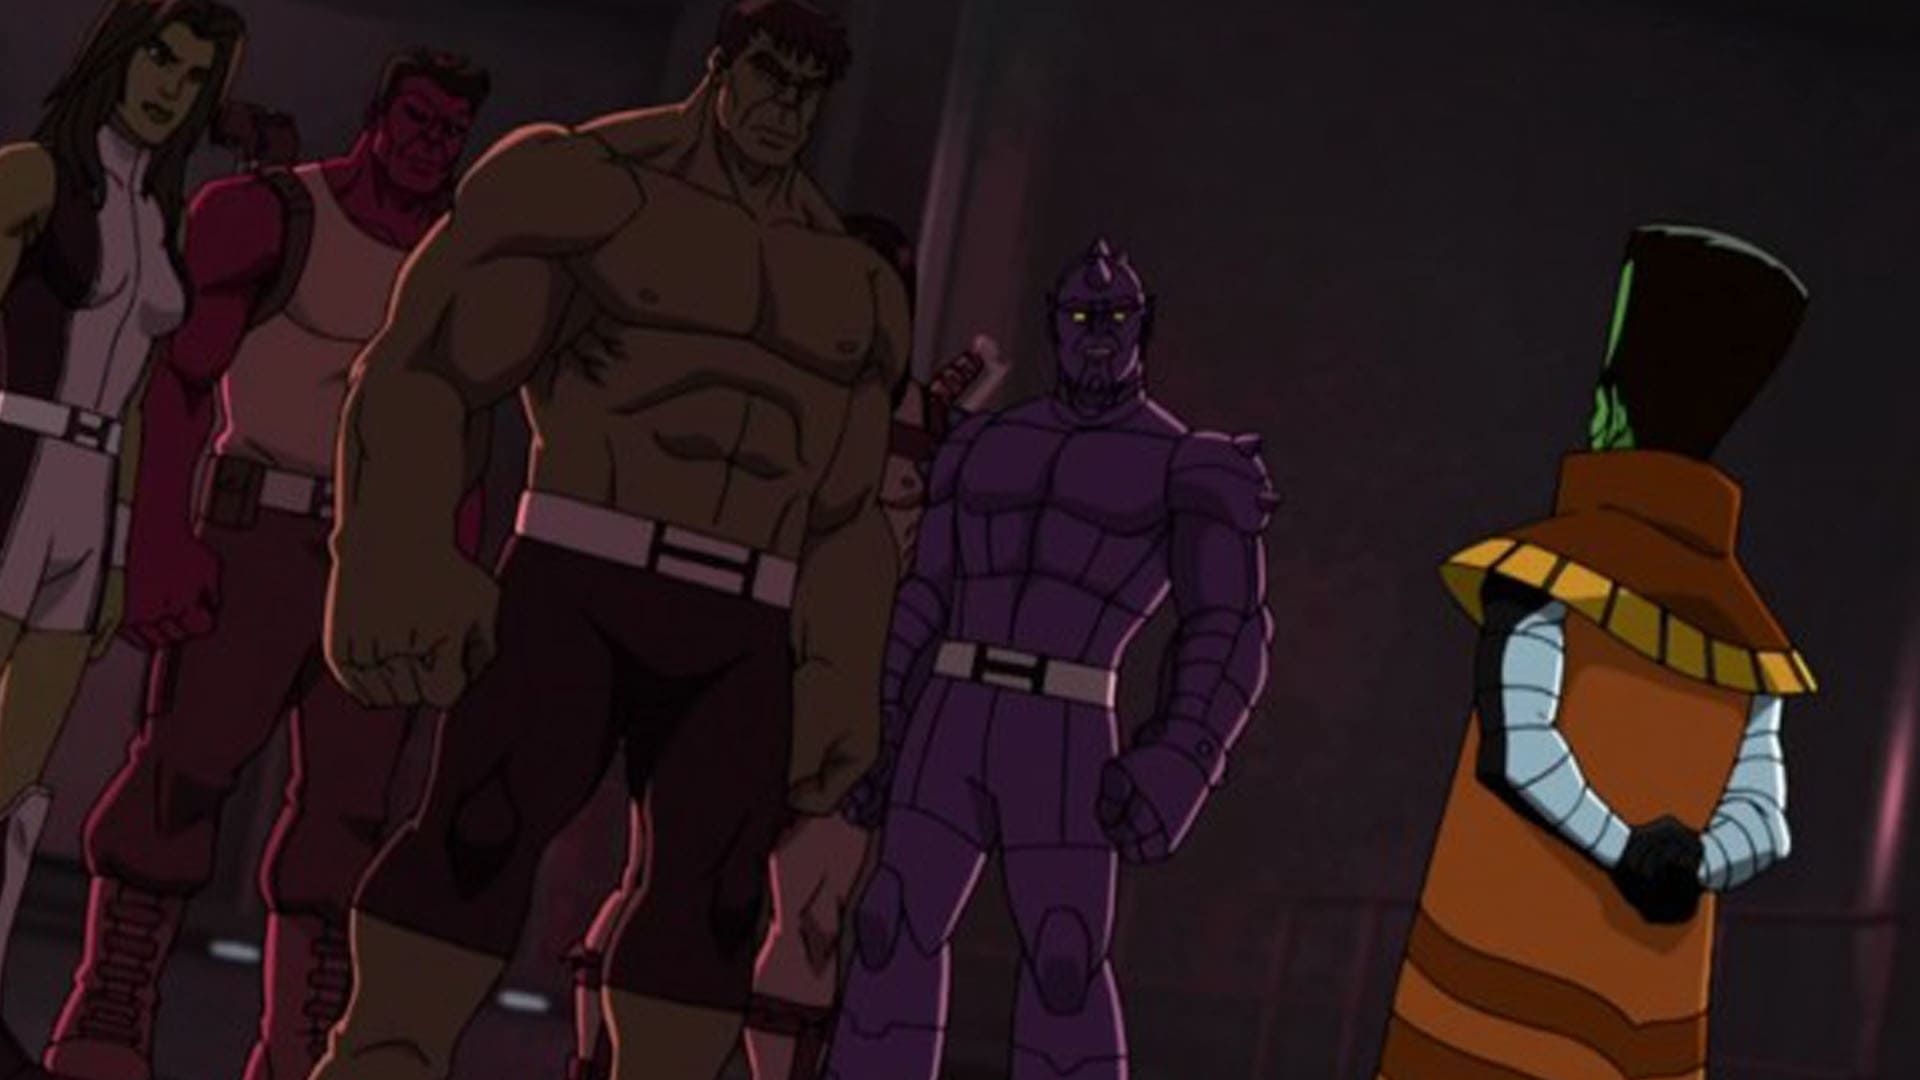 Hulk and the Agents of S.M.A.S.H. background